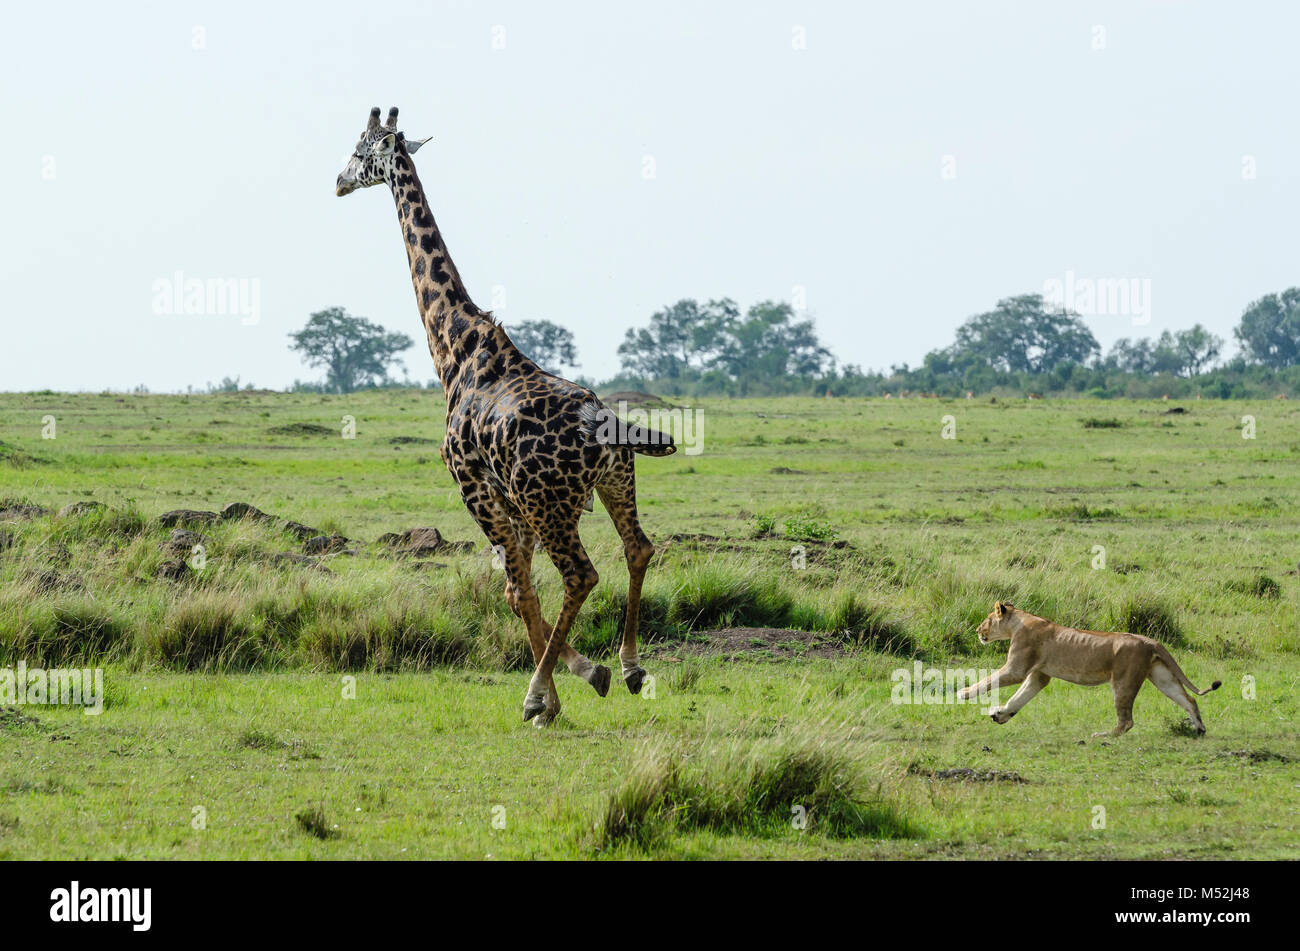 A young lion chasing a giraffe, a risky game as giraffes have been known to kill adult lions with a single kick. Stock Photo